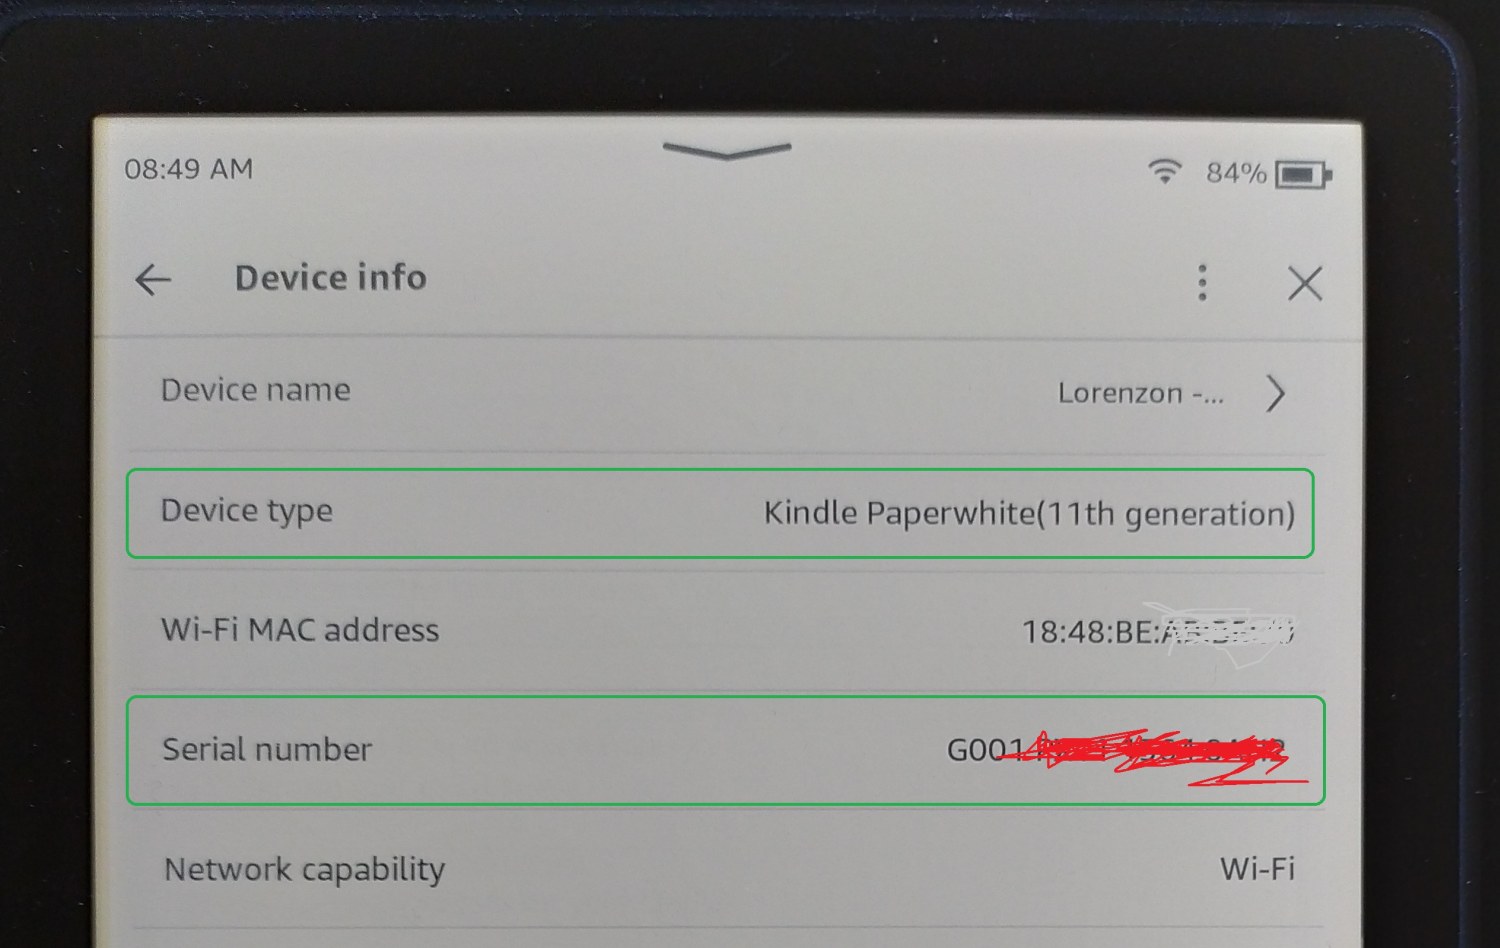 How to find your Kindle e-reader version and serial number?